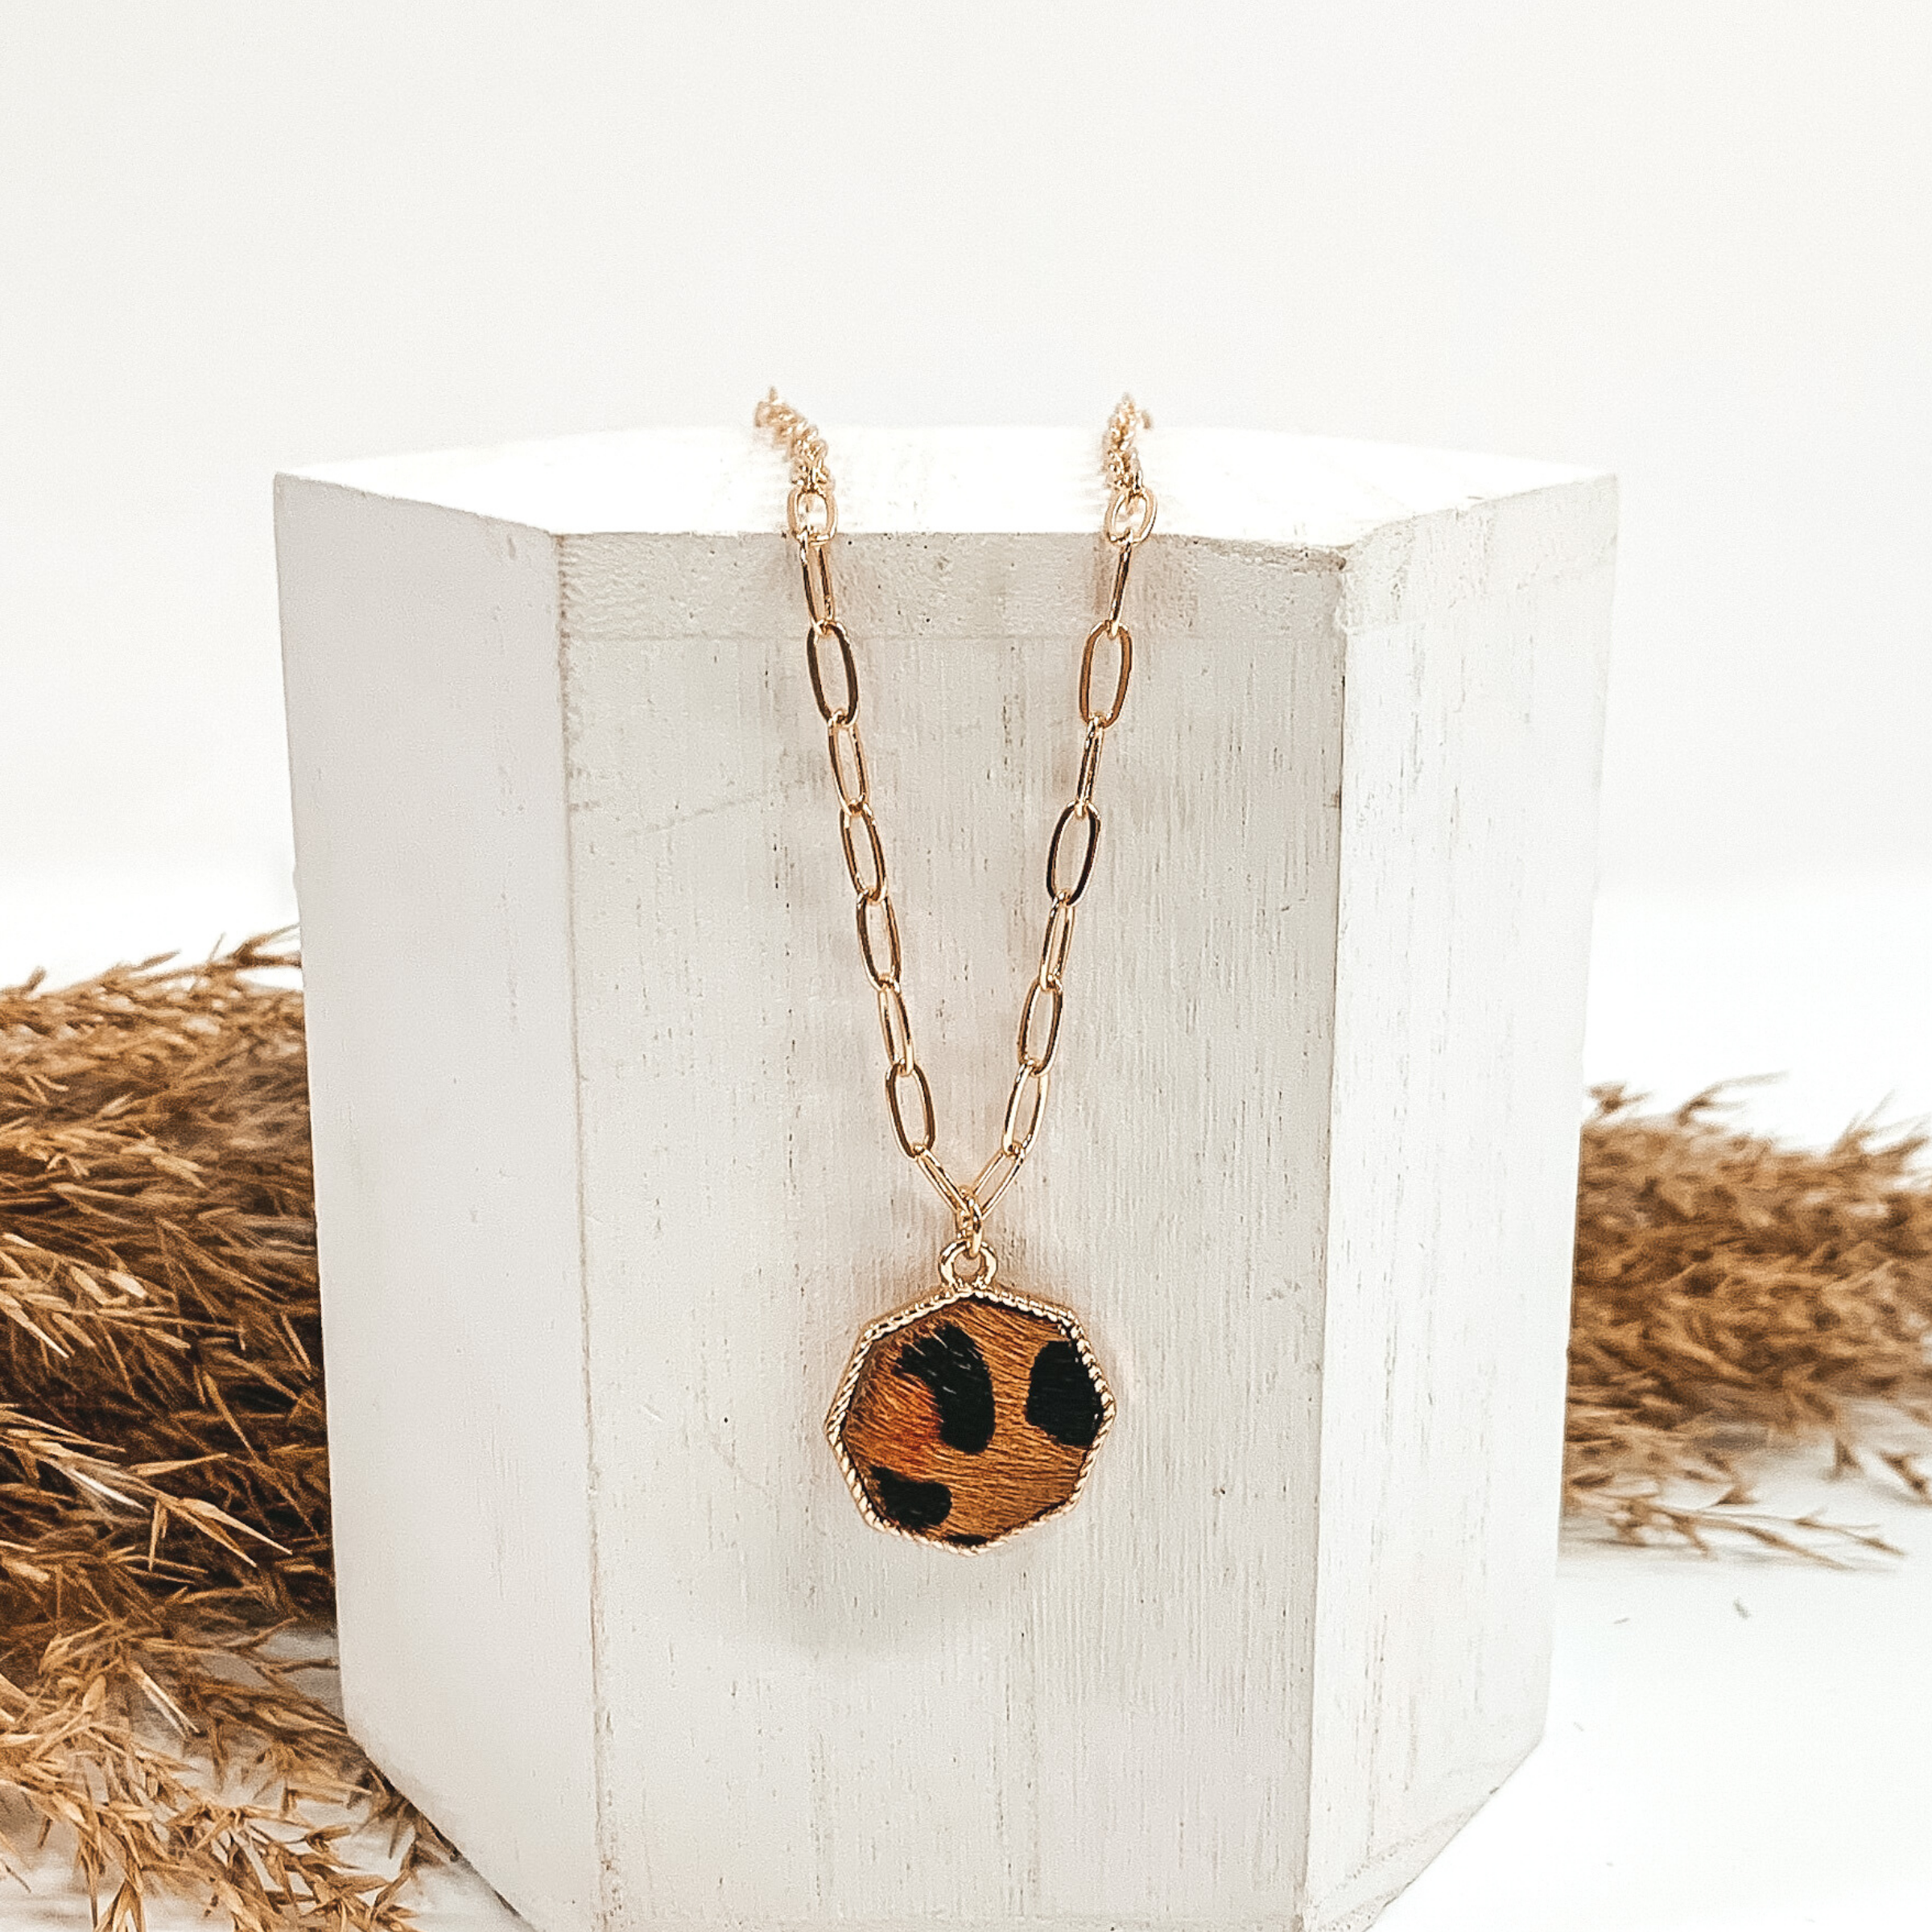 Gold paperclip chain with octagon pendant. The pendant has a brown hide inlay with black dots. This necklace is pictured laying on a white block with tan floral behind it. This is all pictured on a white background.